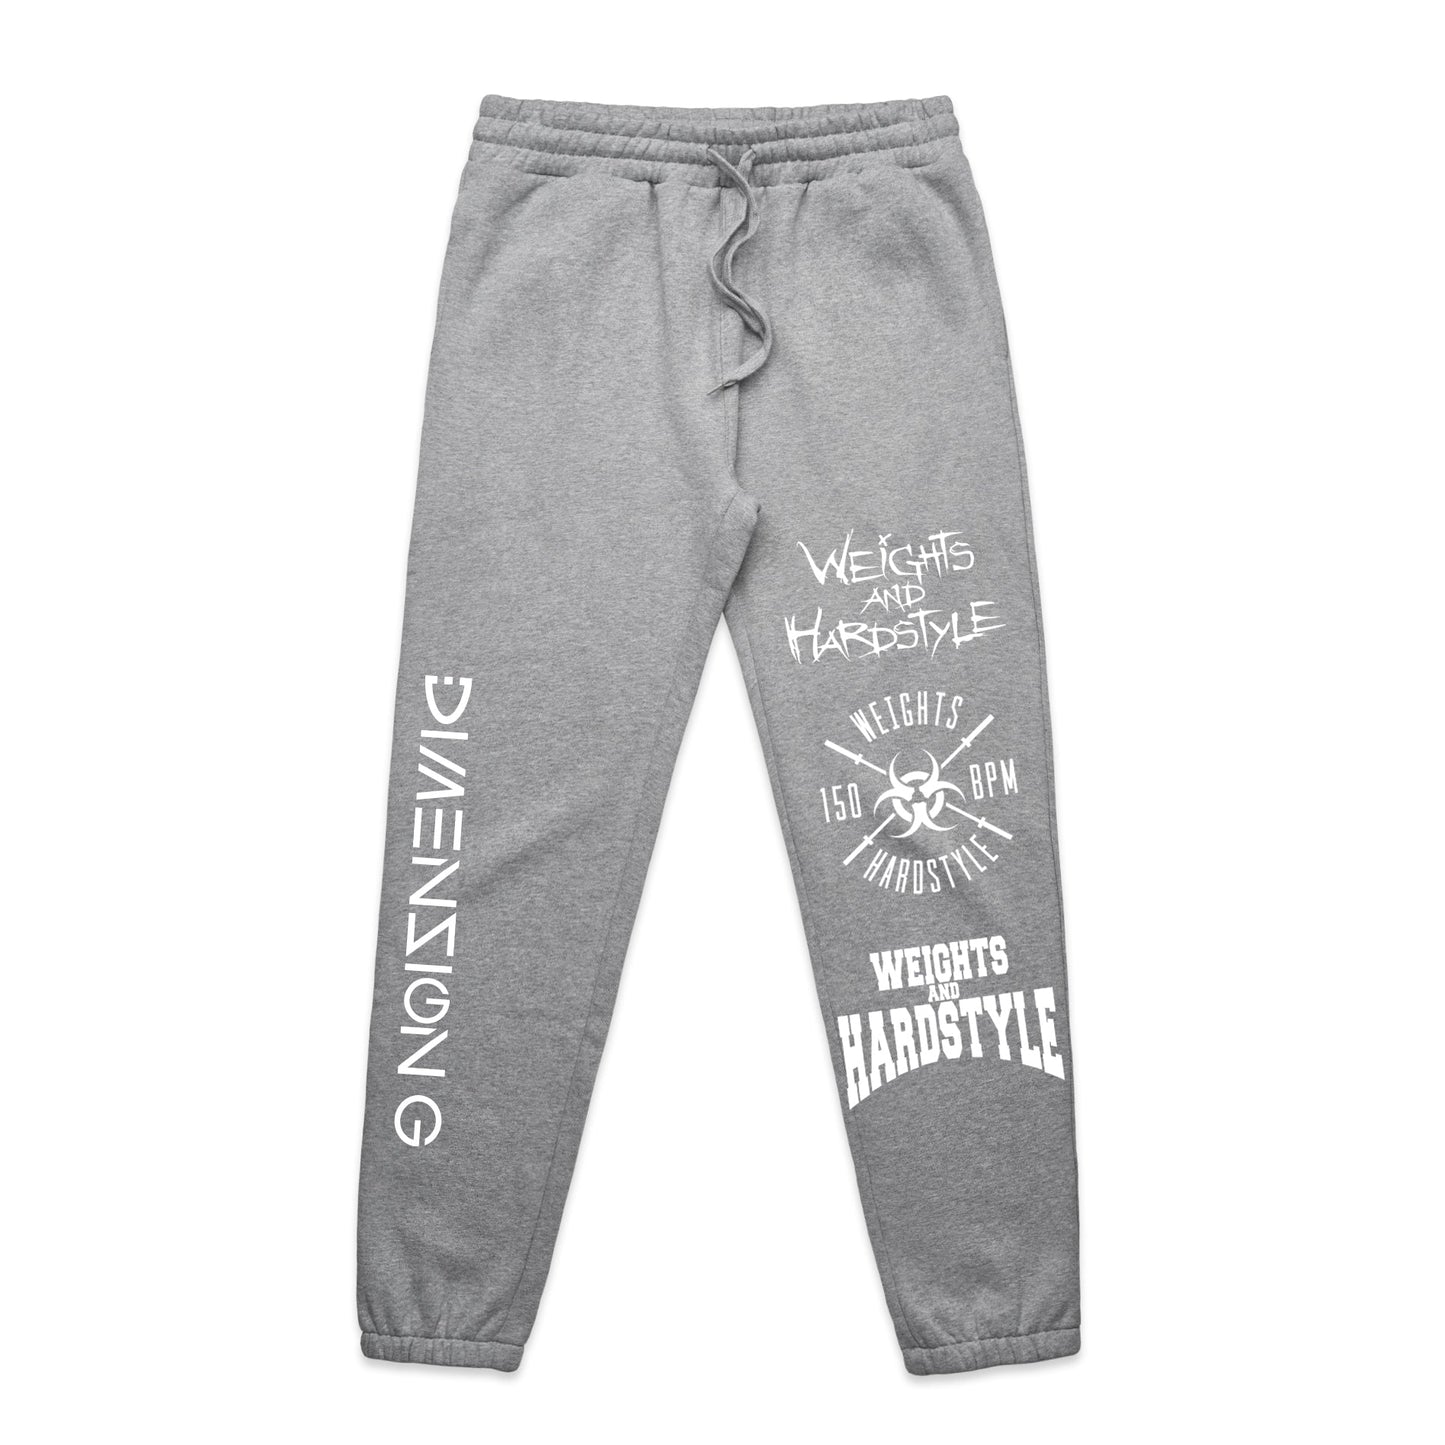 Weights and Hardstyle Joggers Bundle